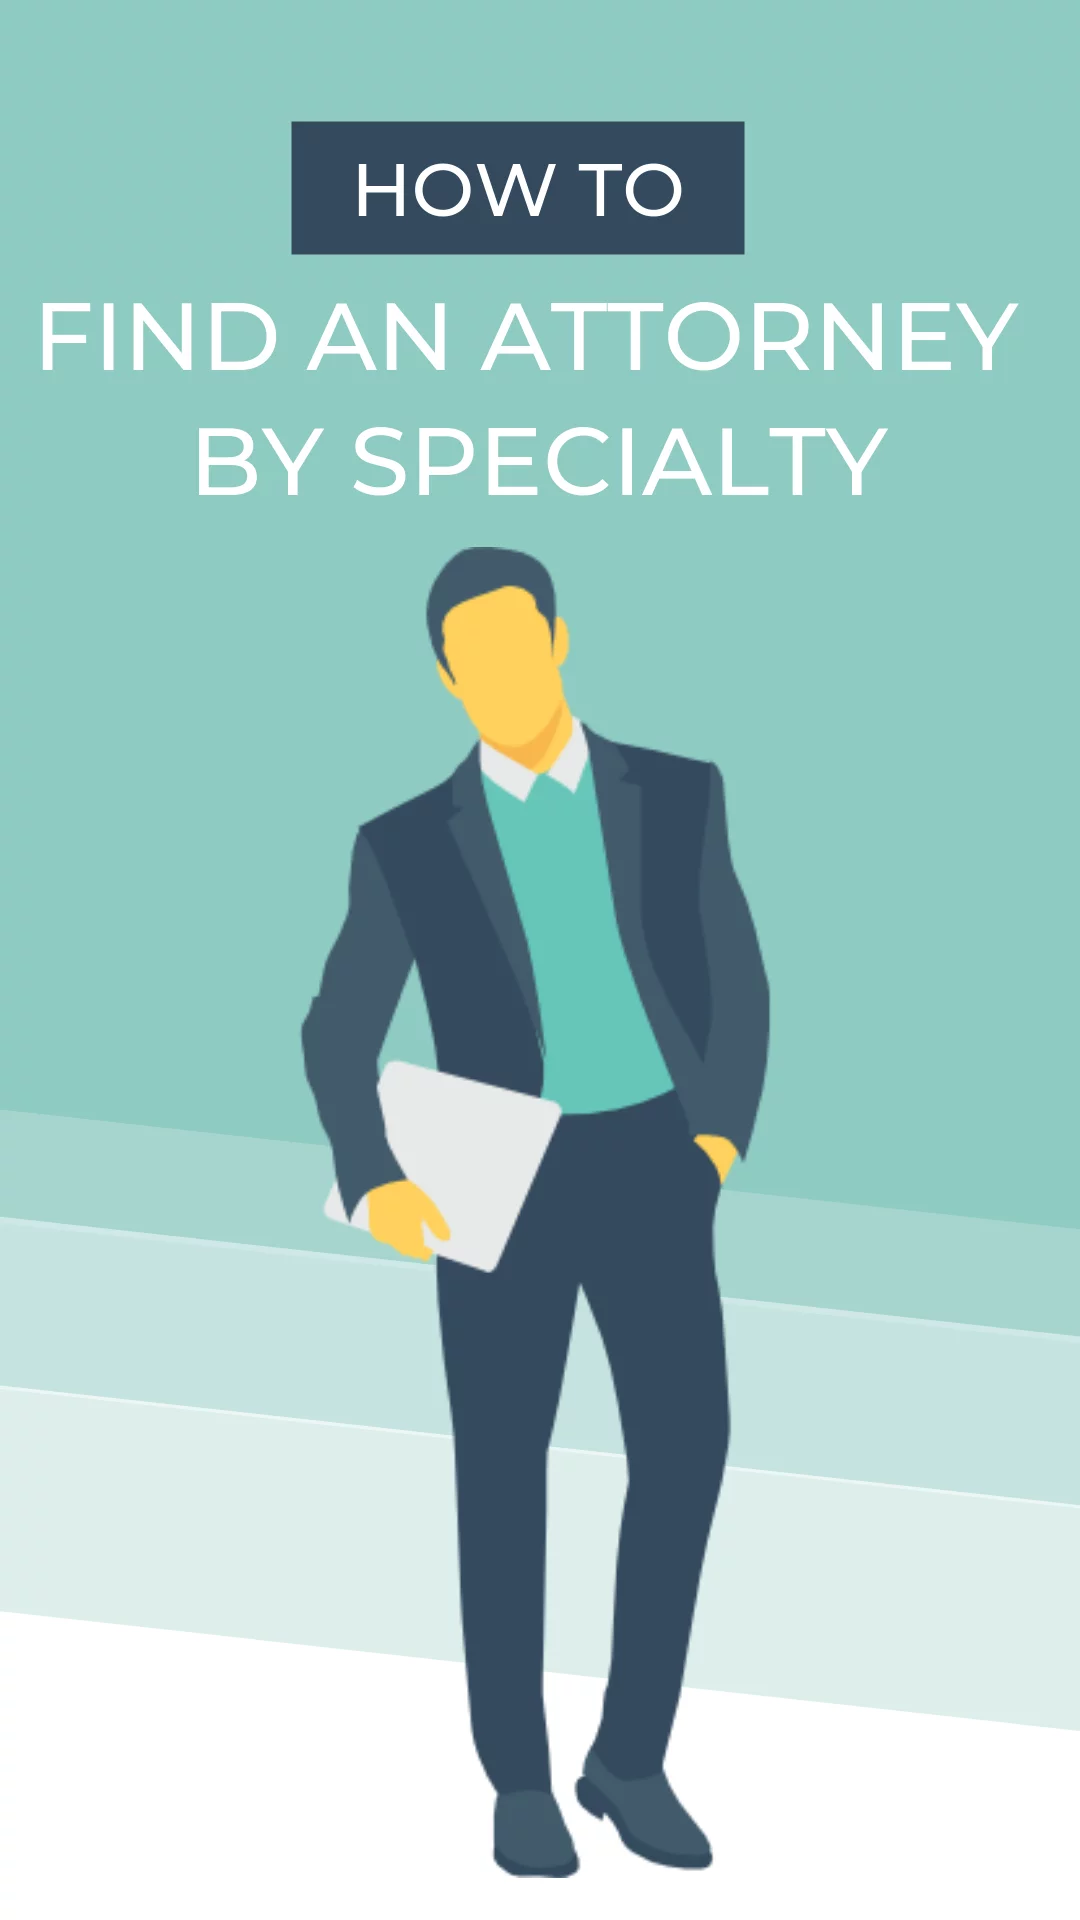 How to Find an Attorney by Specialty